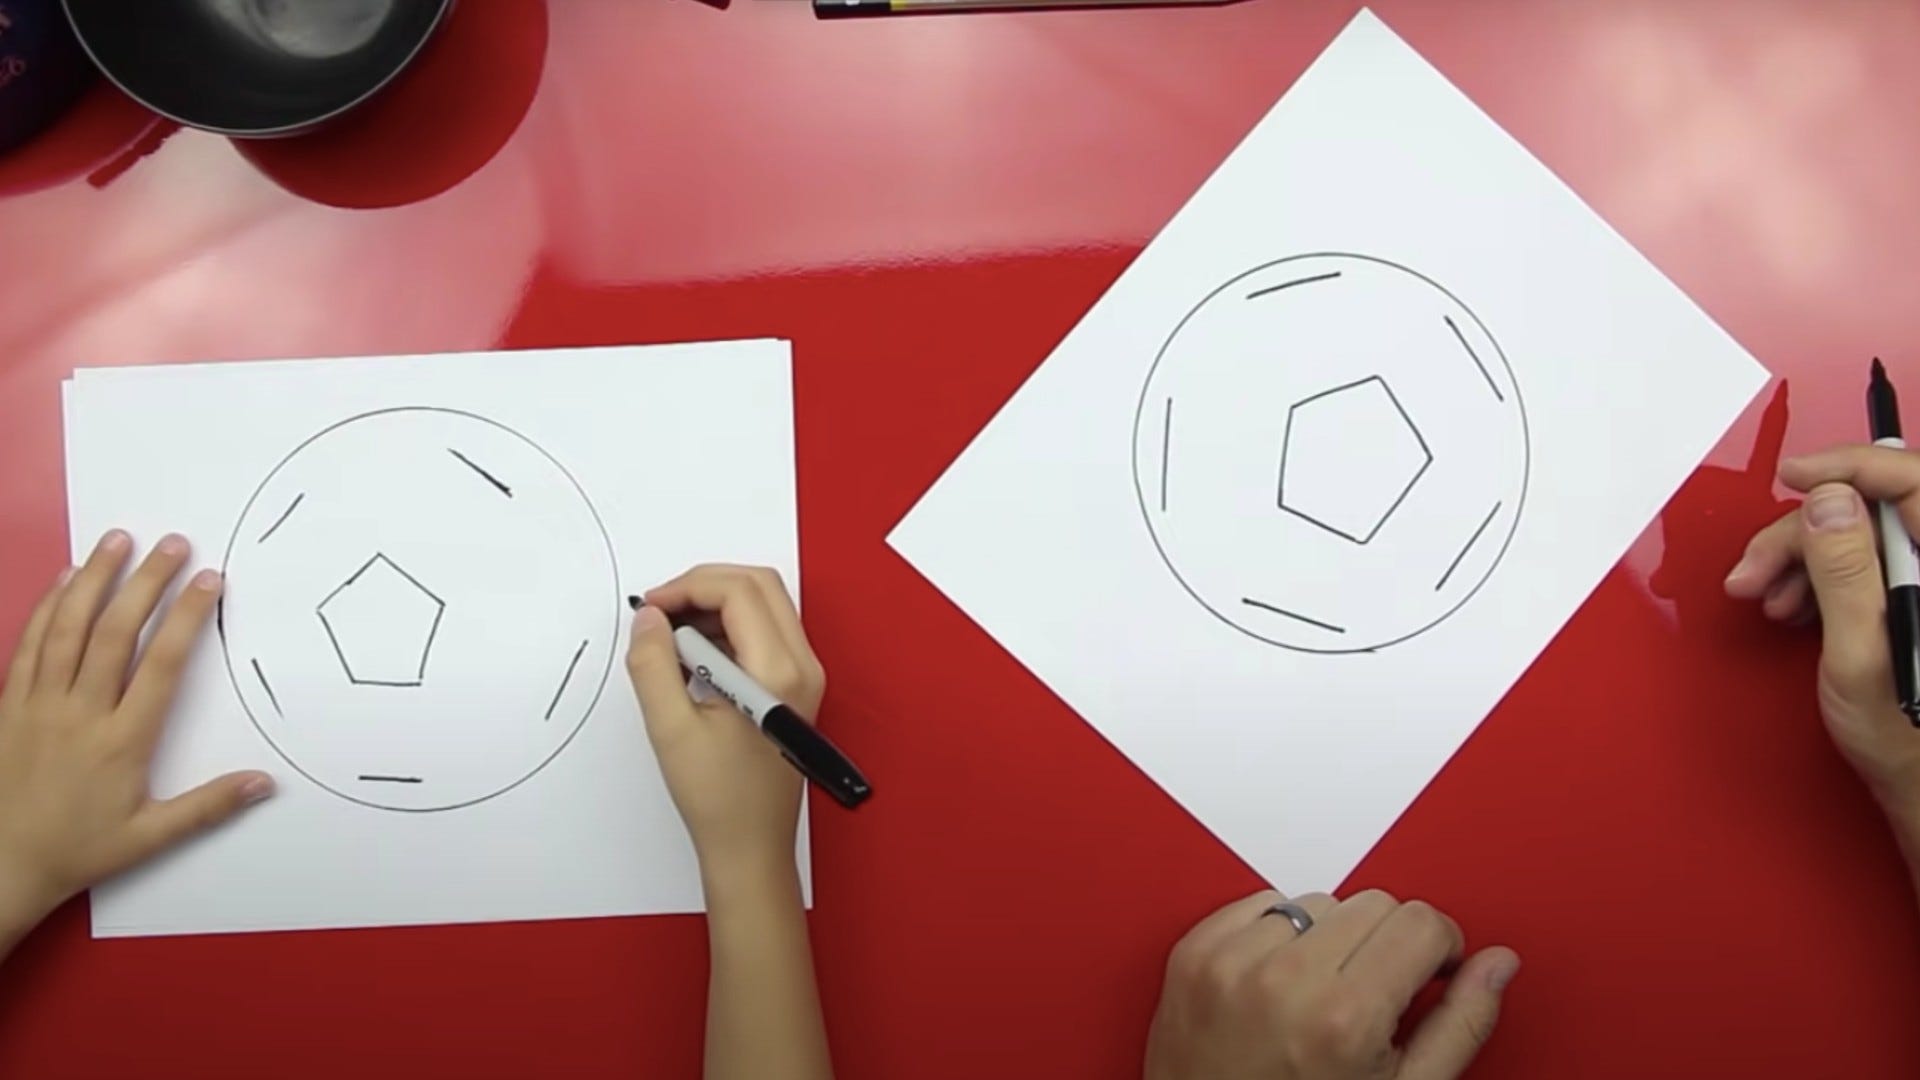 How to draw a soccer ball 3